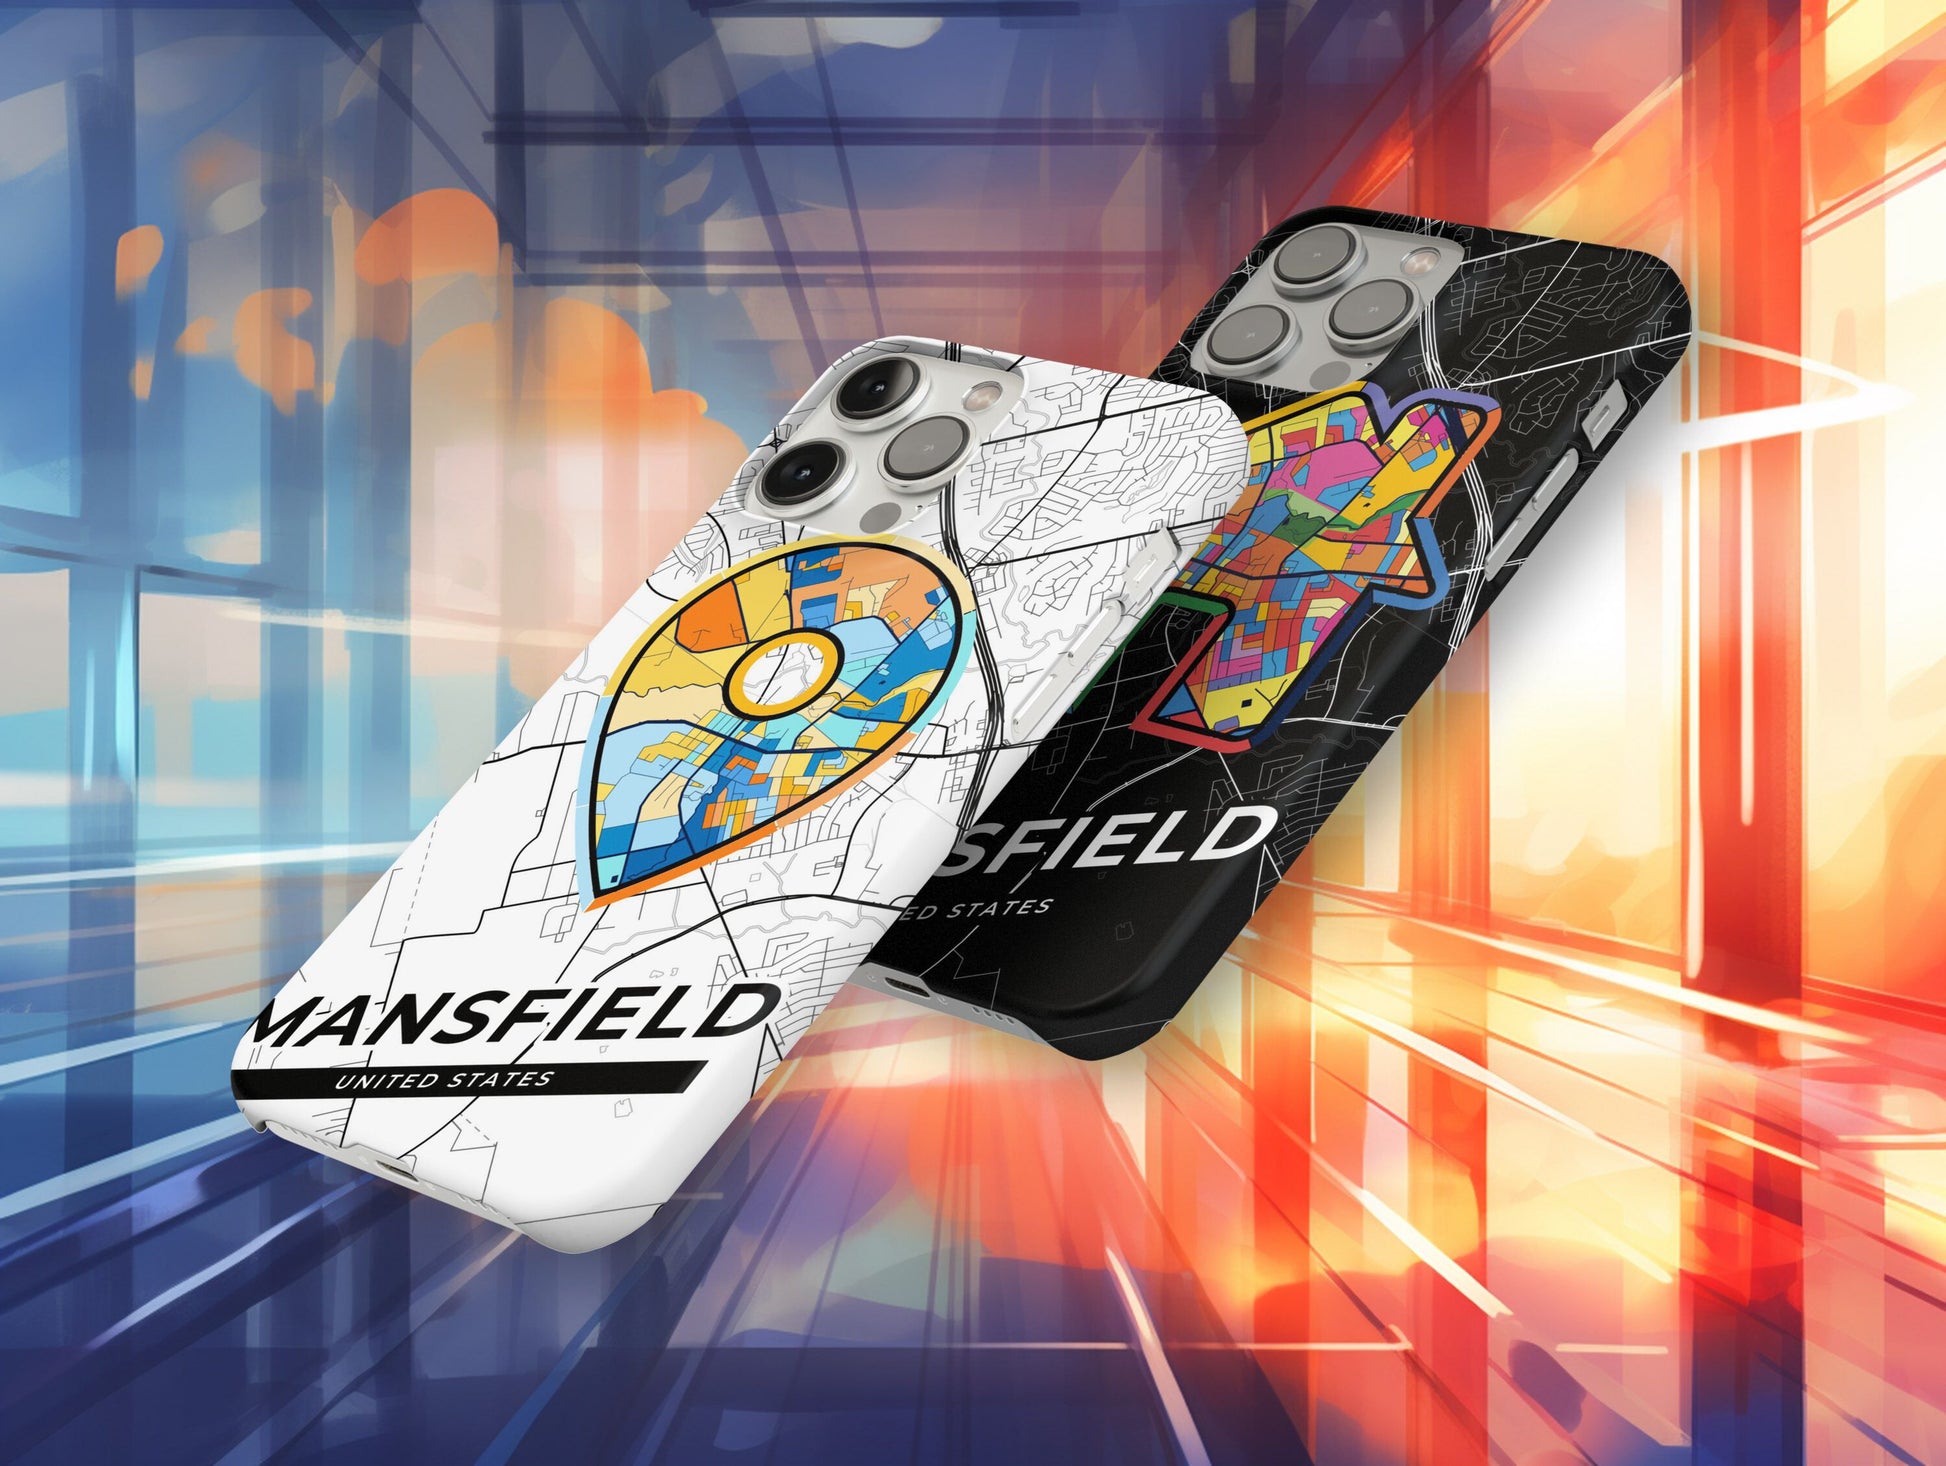 Mansfield Texas slim phone case with colorful icon. Birthday, wedding or housewarming gift. Couple match cases.